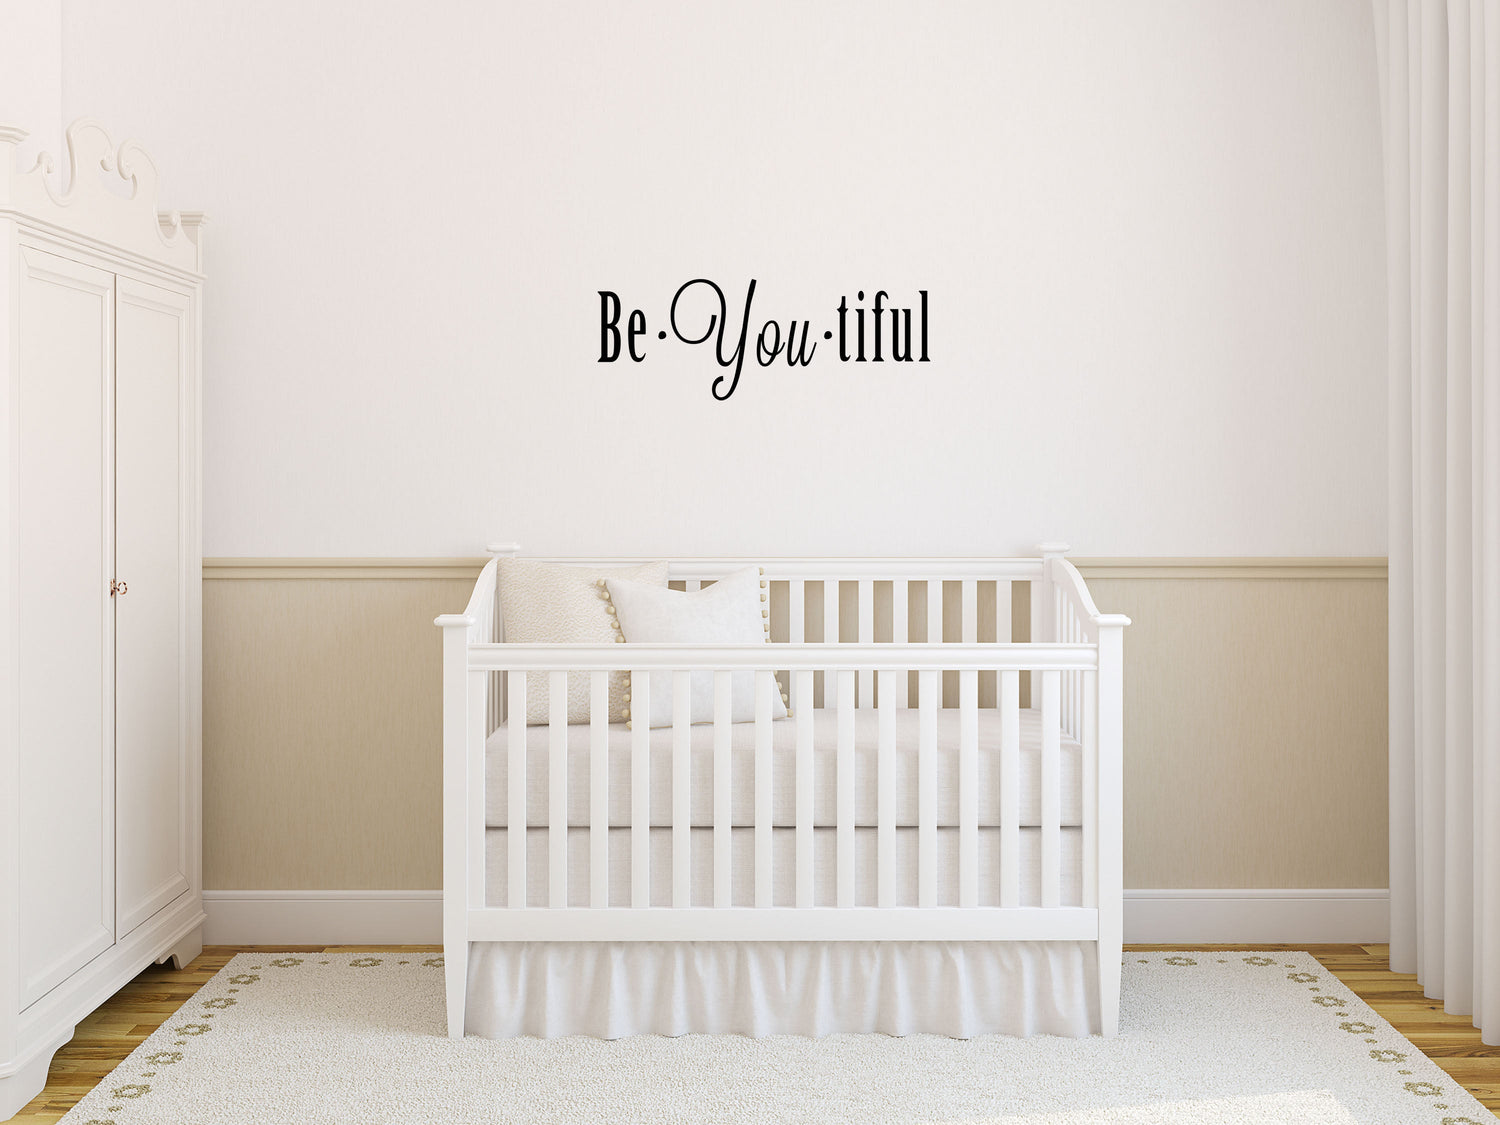 Be You Tiful Bedroom Quote Sticker Vinyl Wall Decal Inspirational Wall Signs 